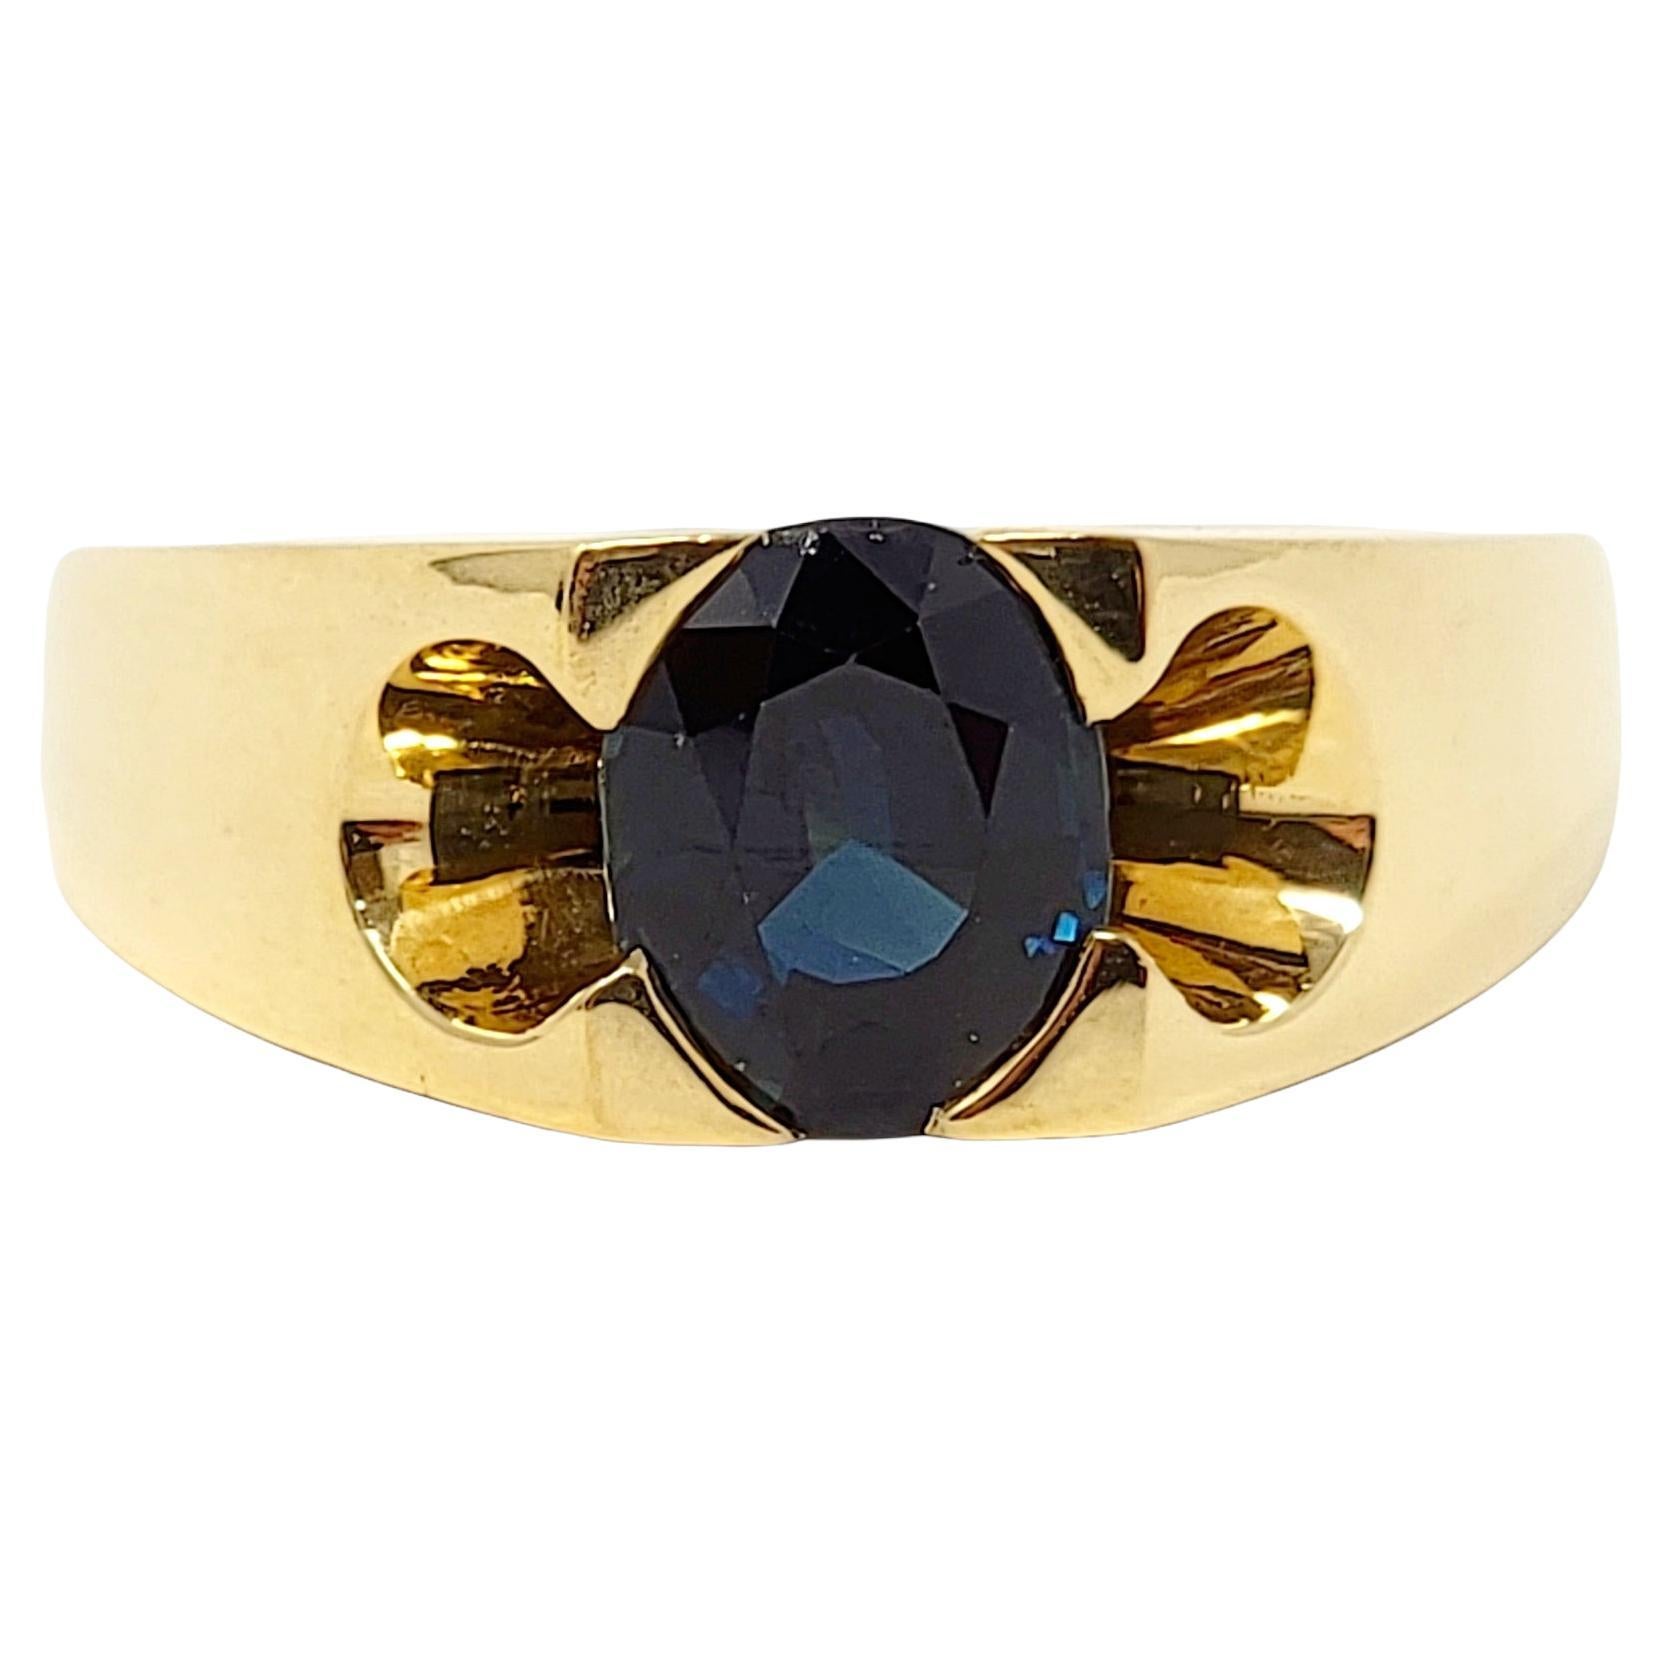 Men's Dark Blue Solitaire Oval Sapphire Band Ring in 18 Karat Yellow Gold